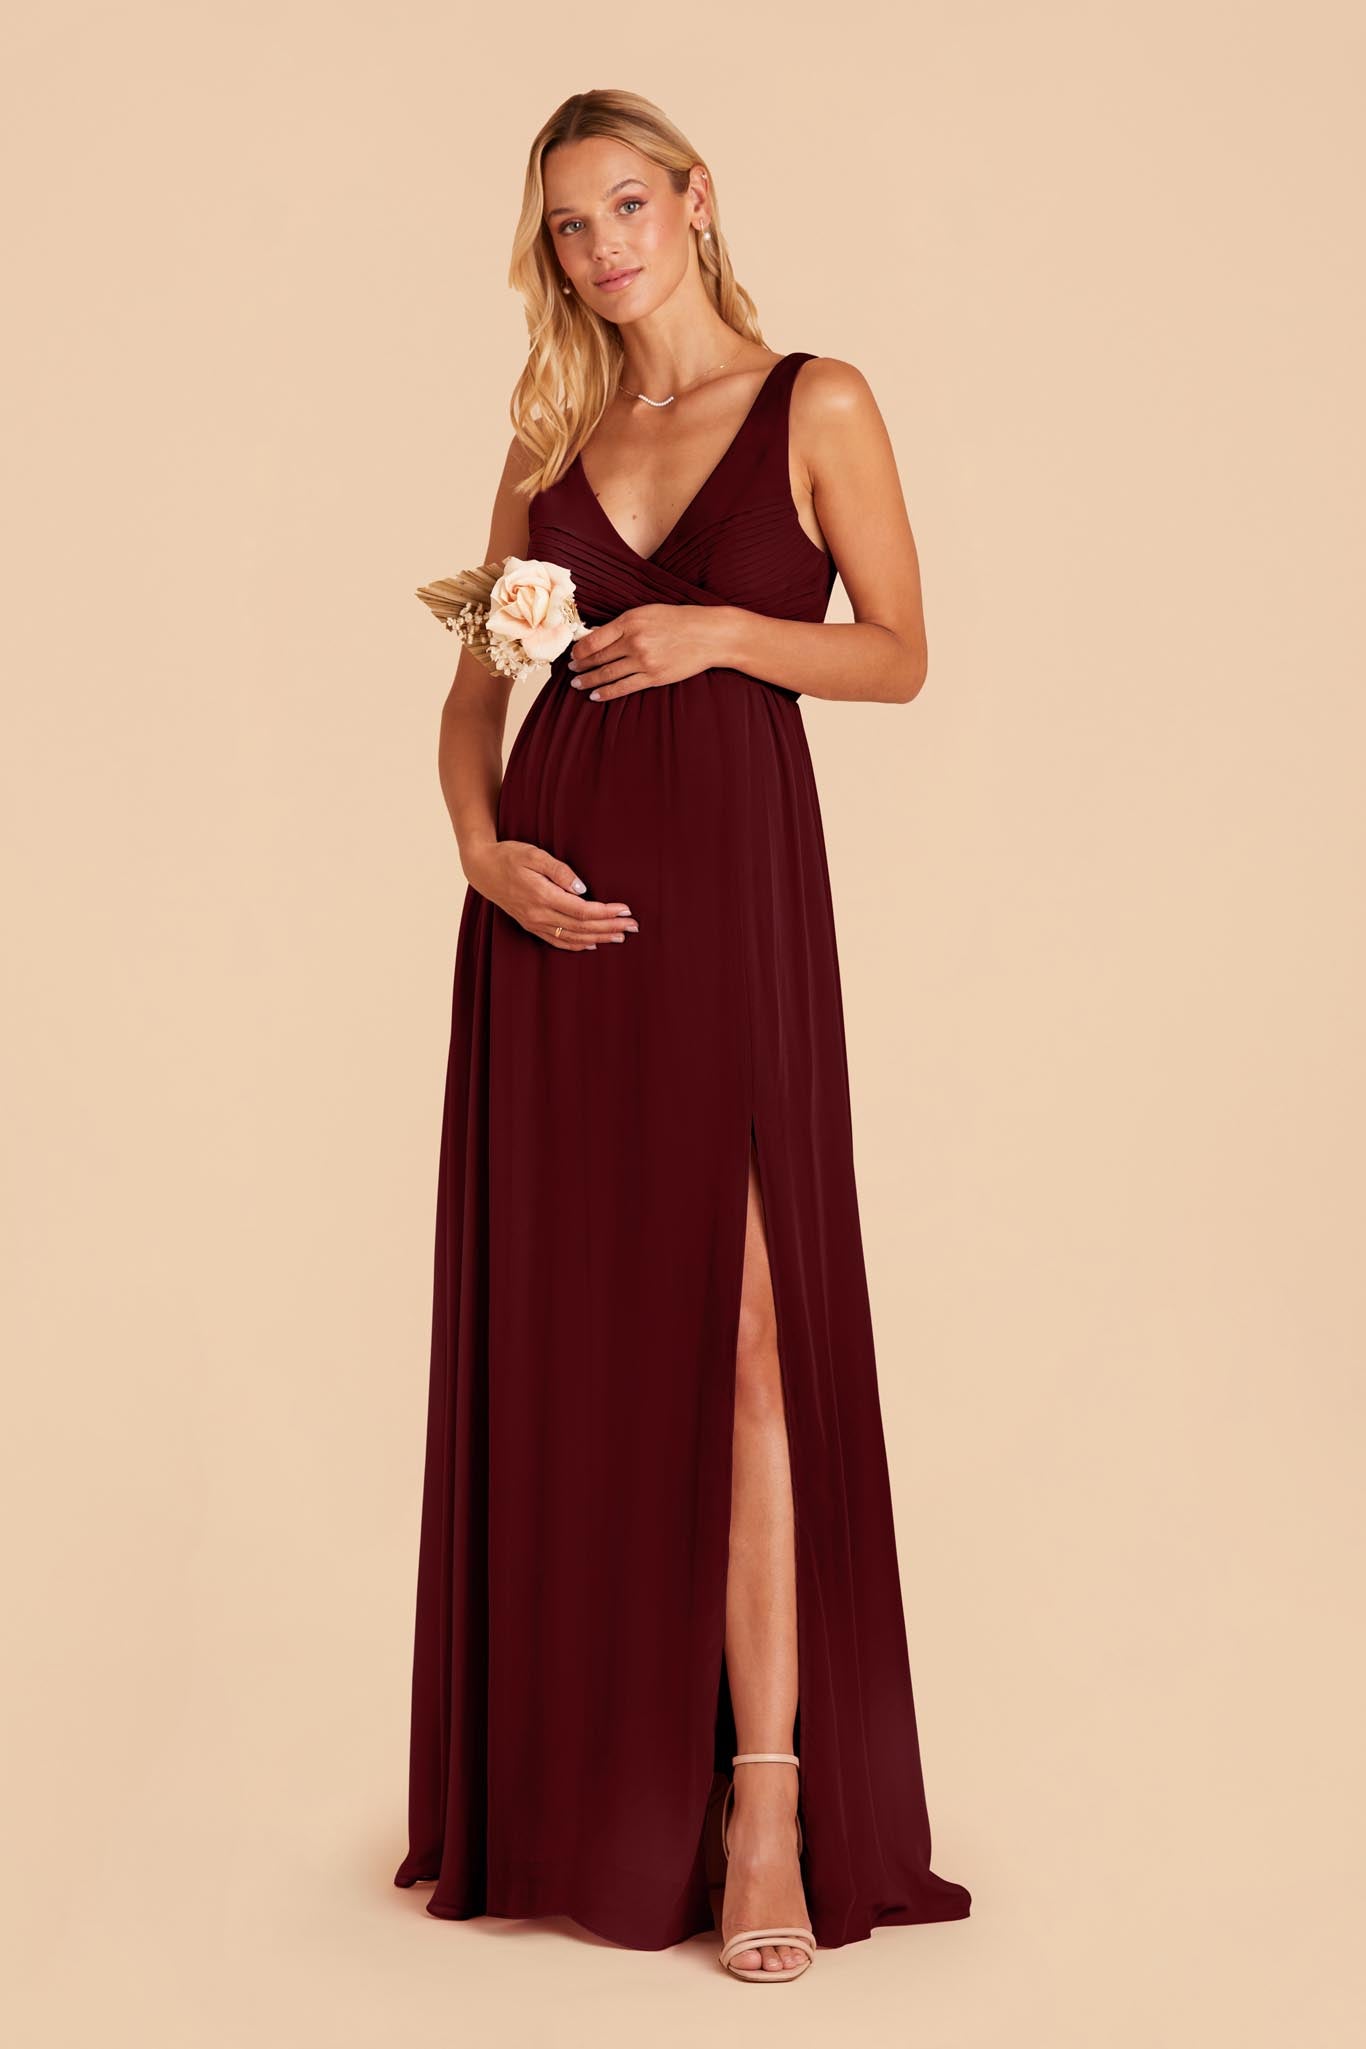 Cabernet Laurie Empire Dress by Birdy Grey